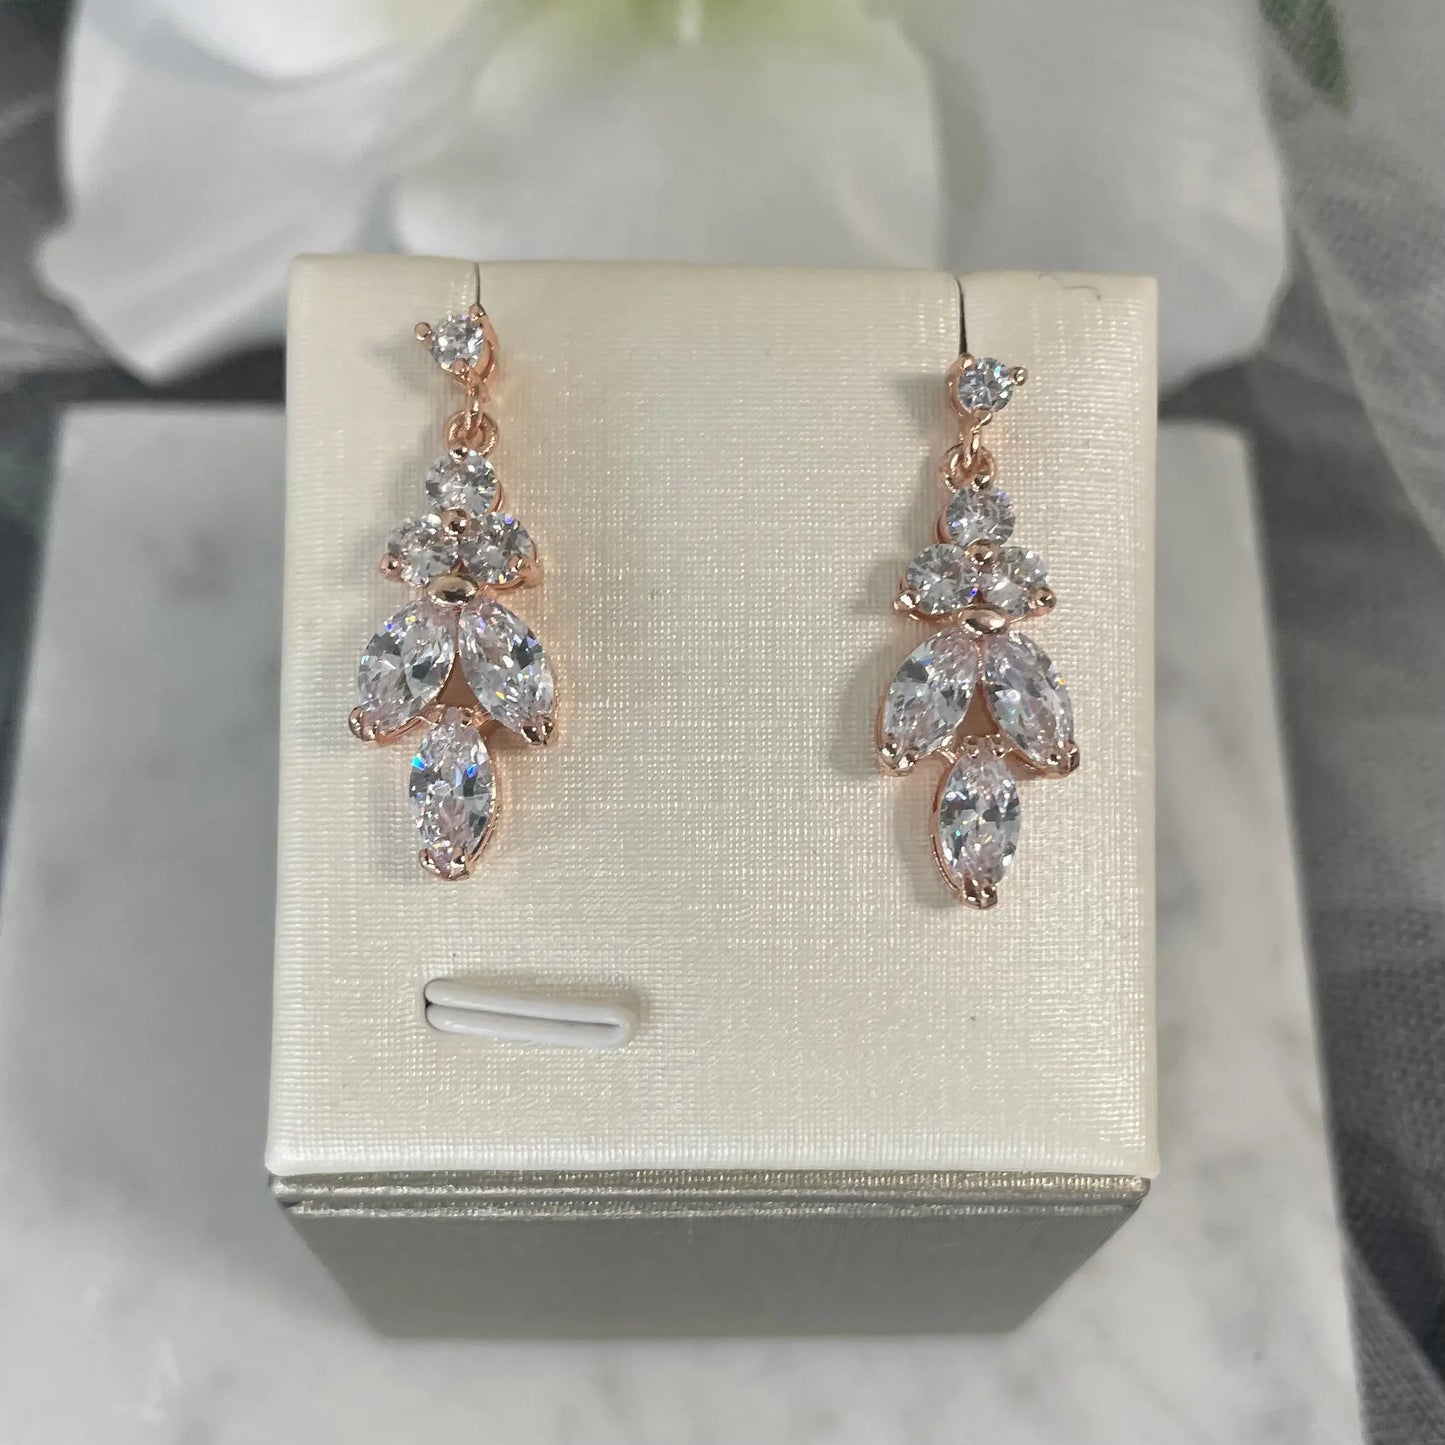 Rose Gold Earrings: Elegant rose gold earrings featuring a leaf and flower design with clear cubic zirconia.